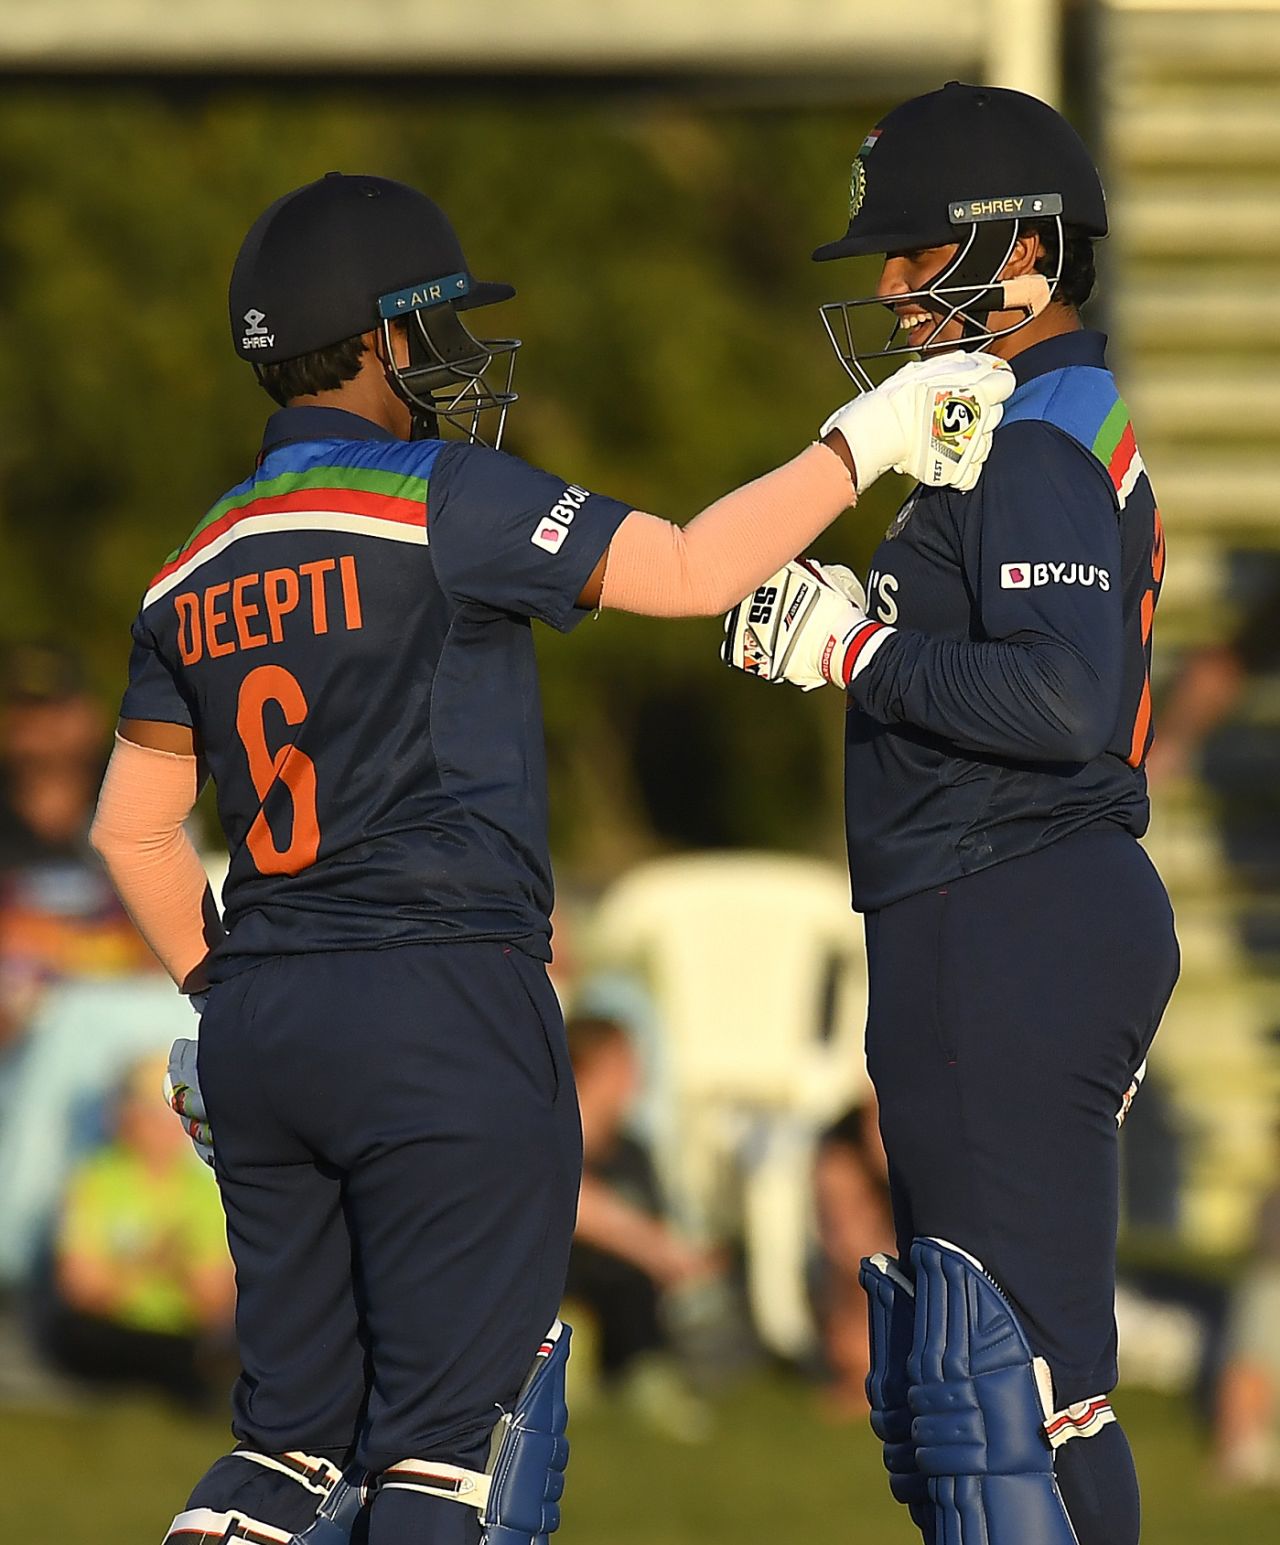 Deepti Sharma pats on Richa Ghosh's shoulder after the 17-year-old batter swatted Darcie Brown for a six, Australia Women vs India Women, 2nd ODI, Mackay, September 24, 2021